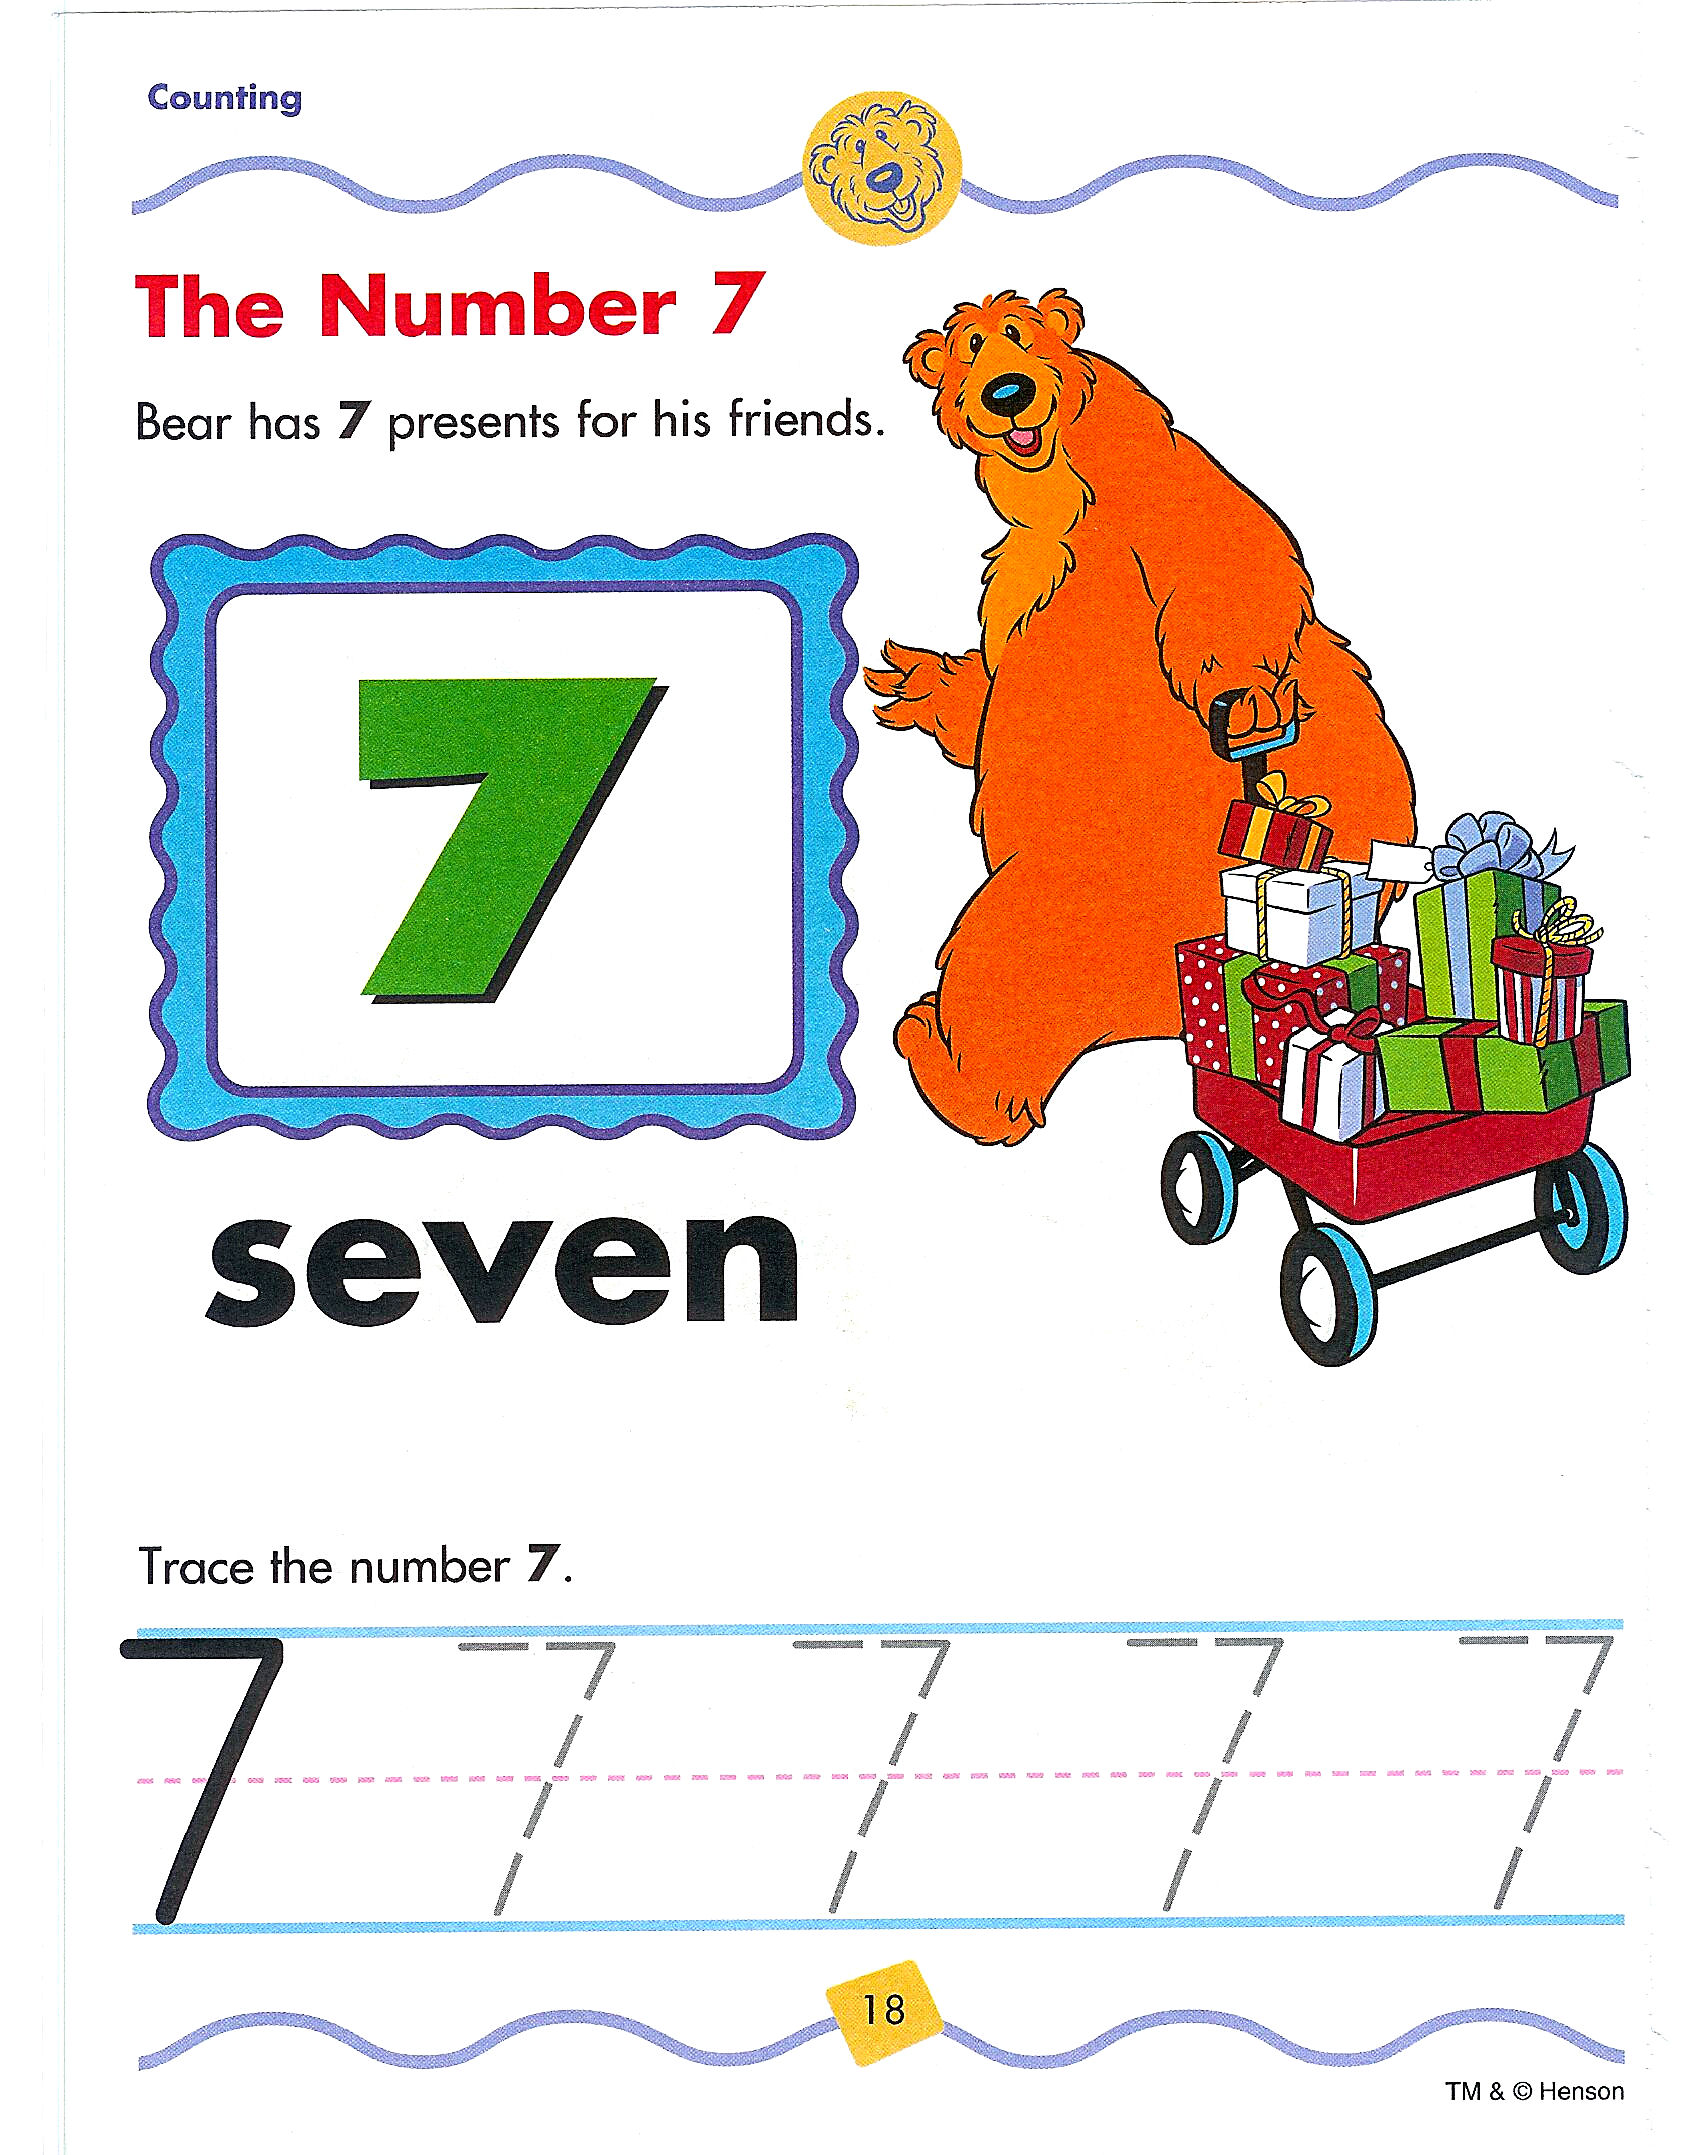 Counting with Bear Ages 2-5 Bendon - Counting With Bear p18.jpg